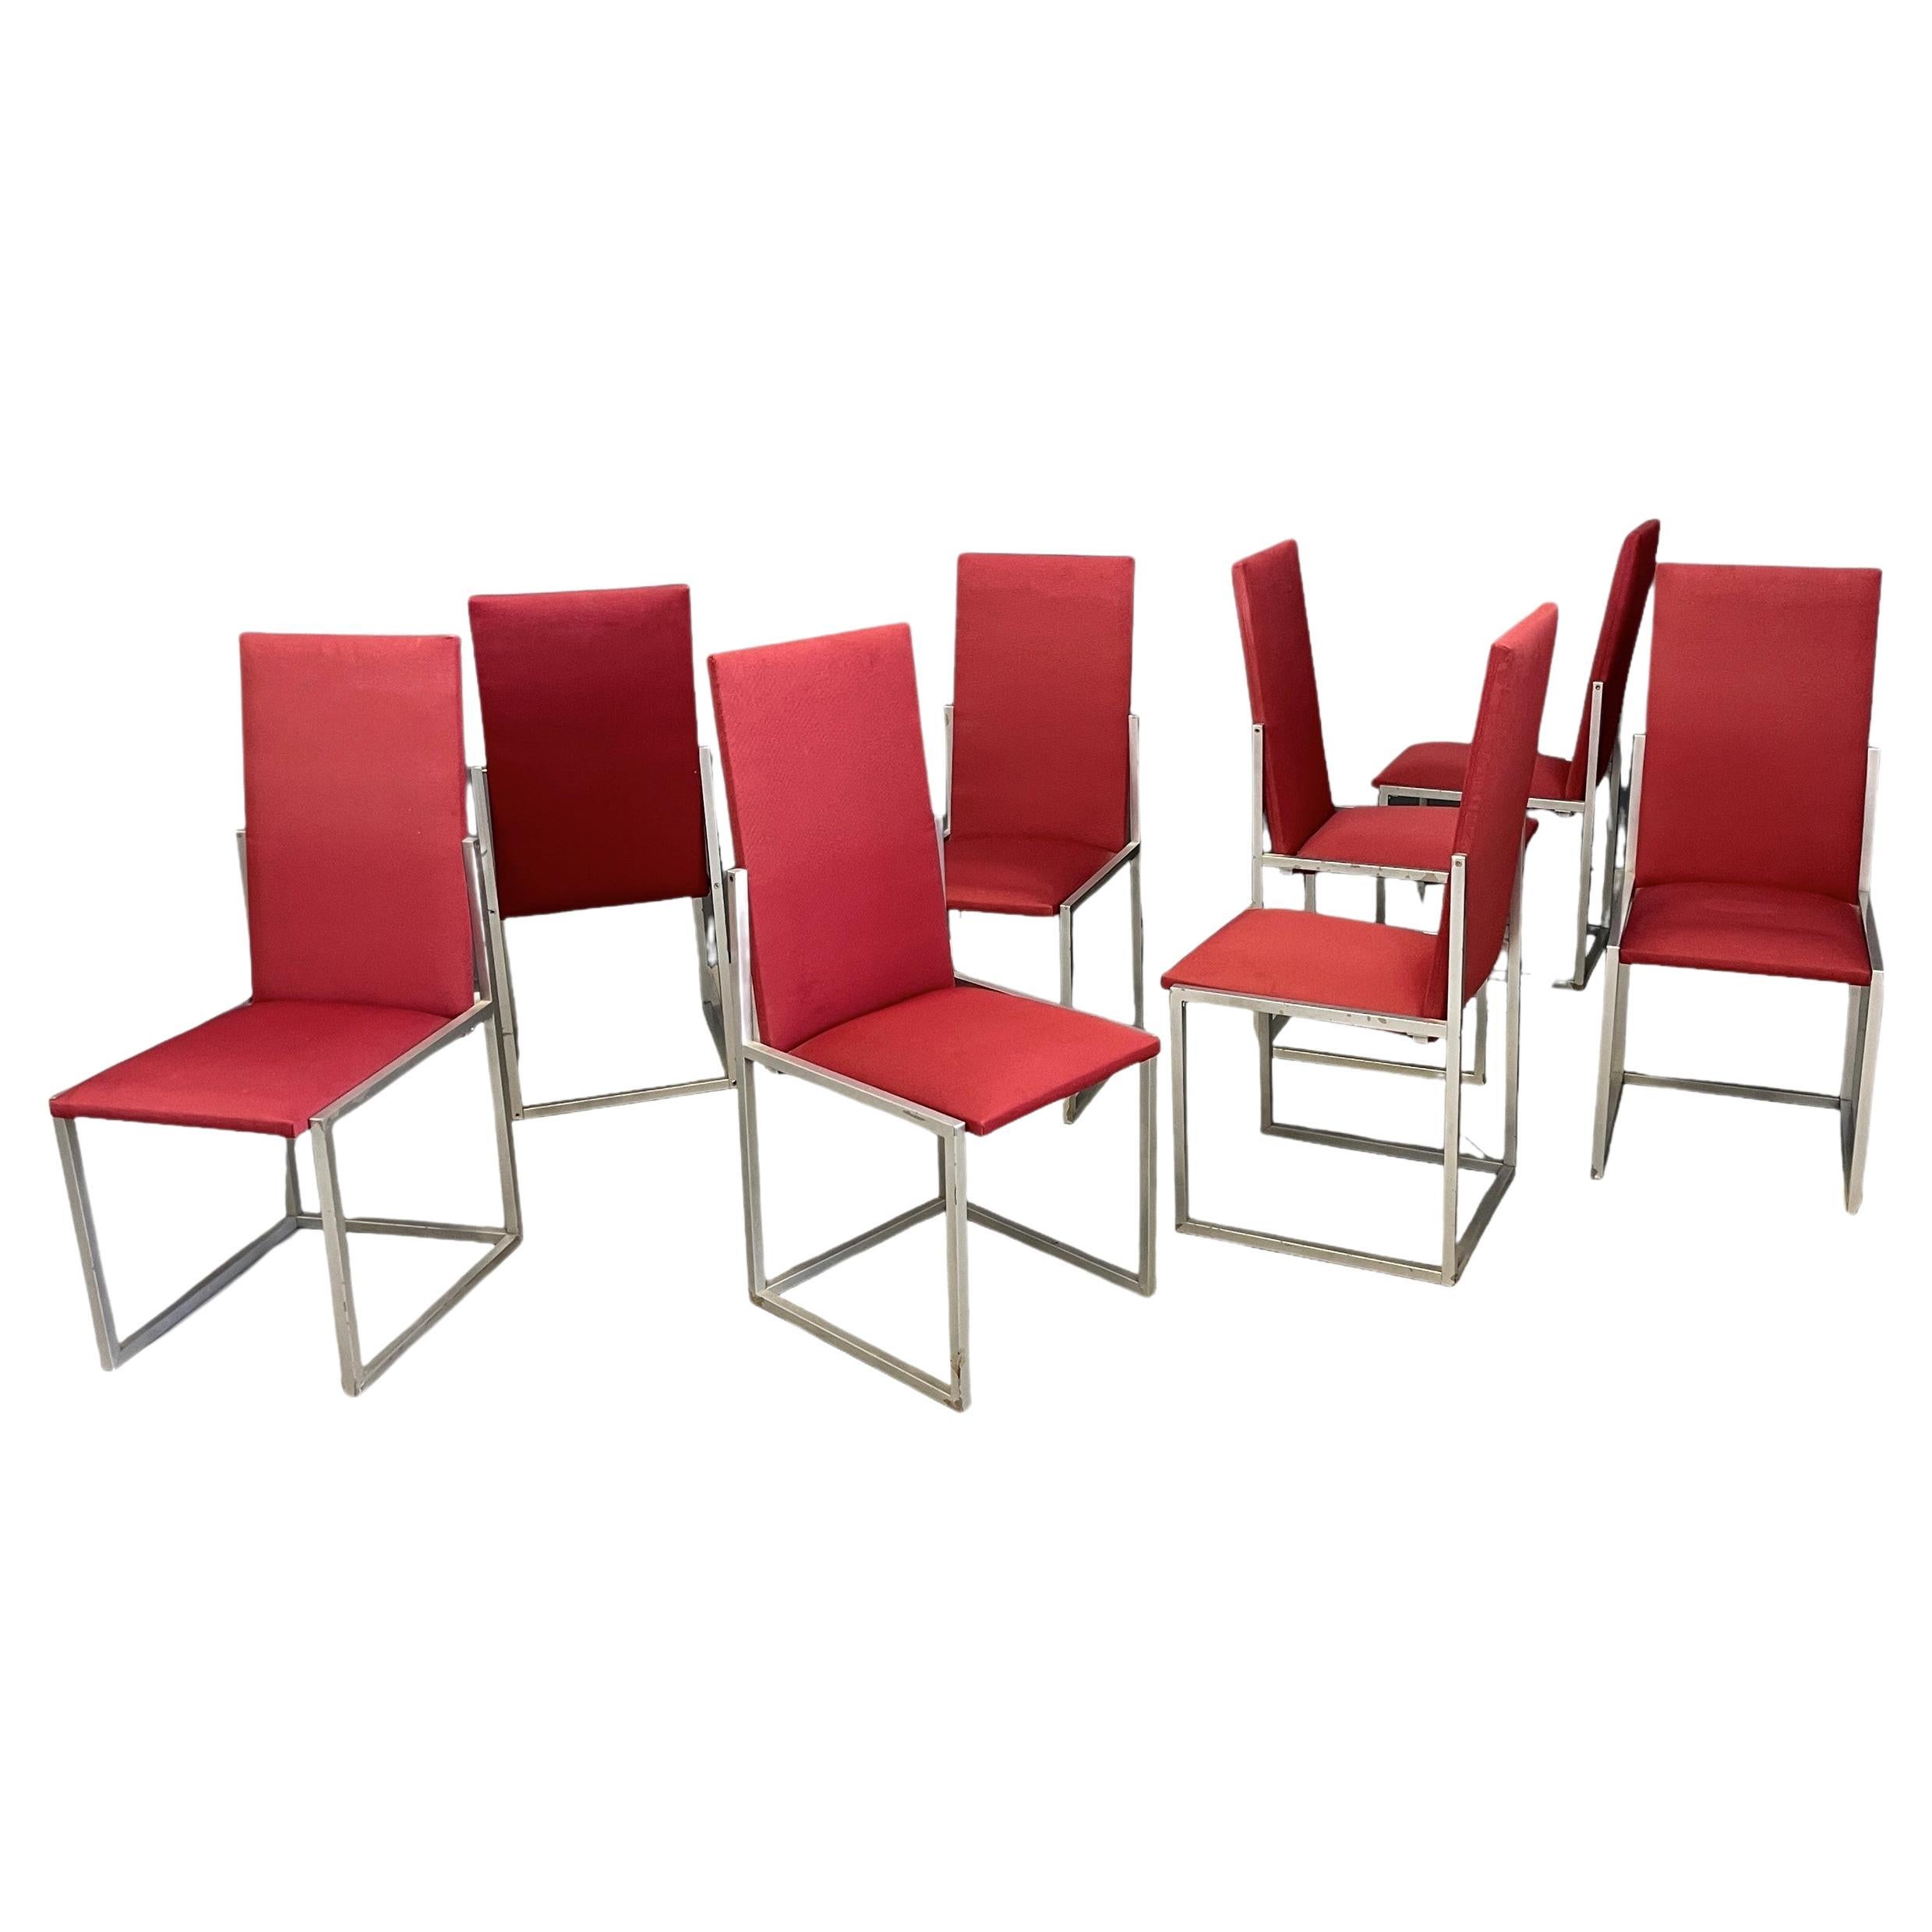 Eight Italian Chairs, Turri Production, 1970s For Sale